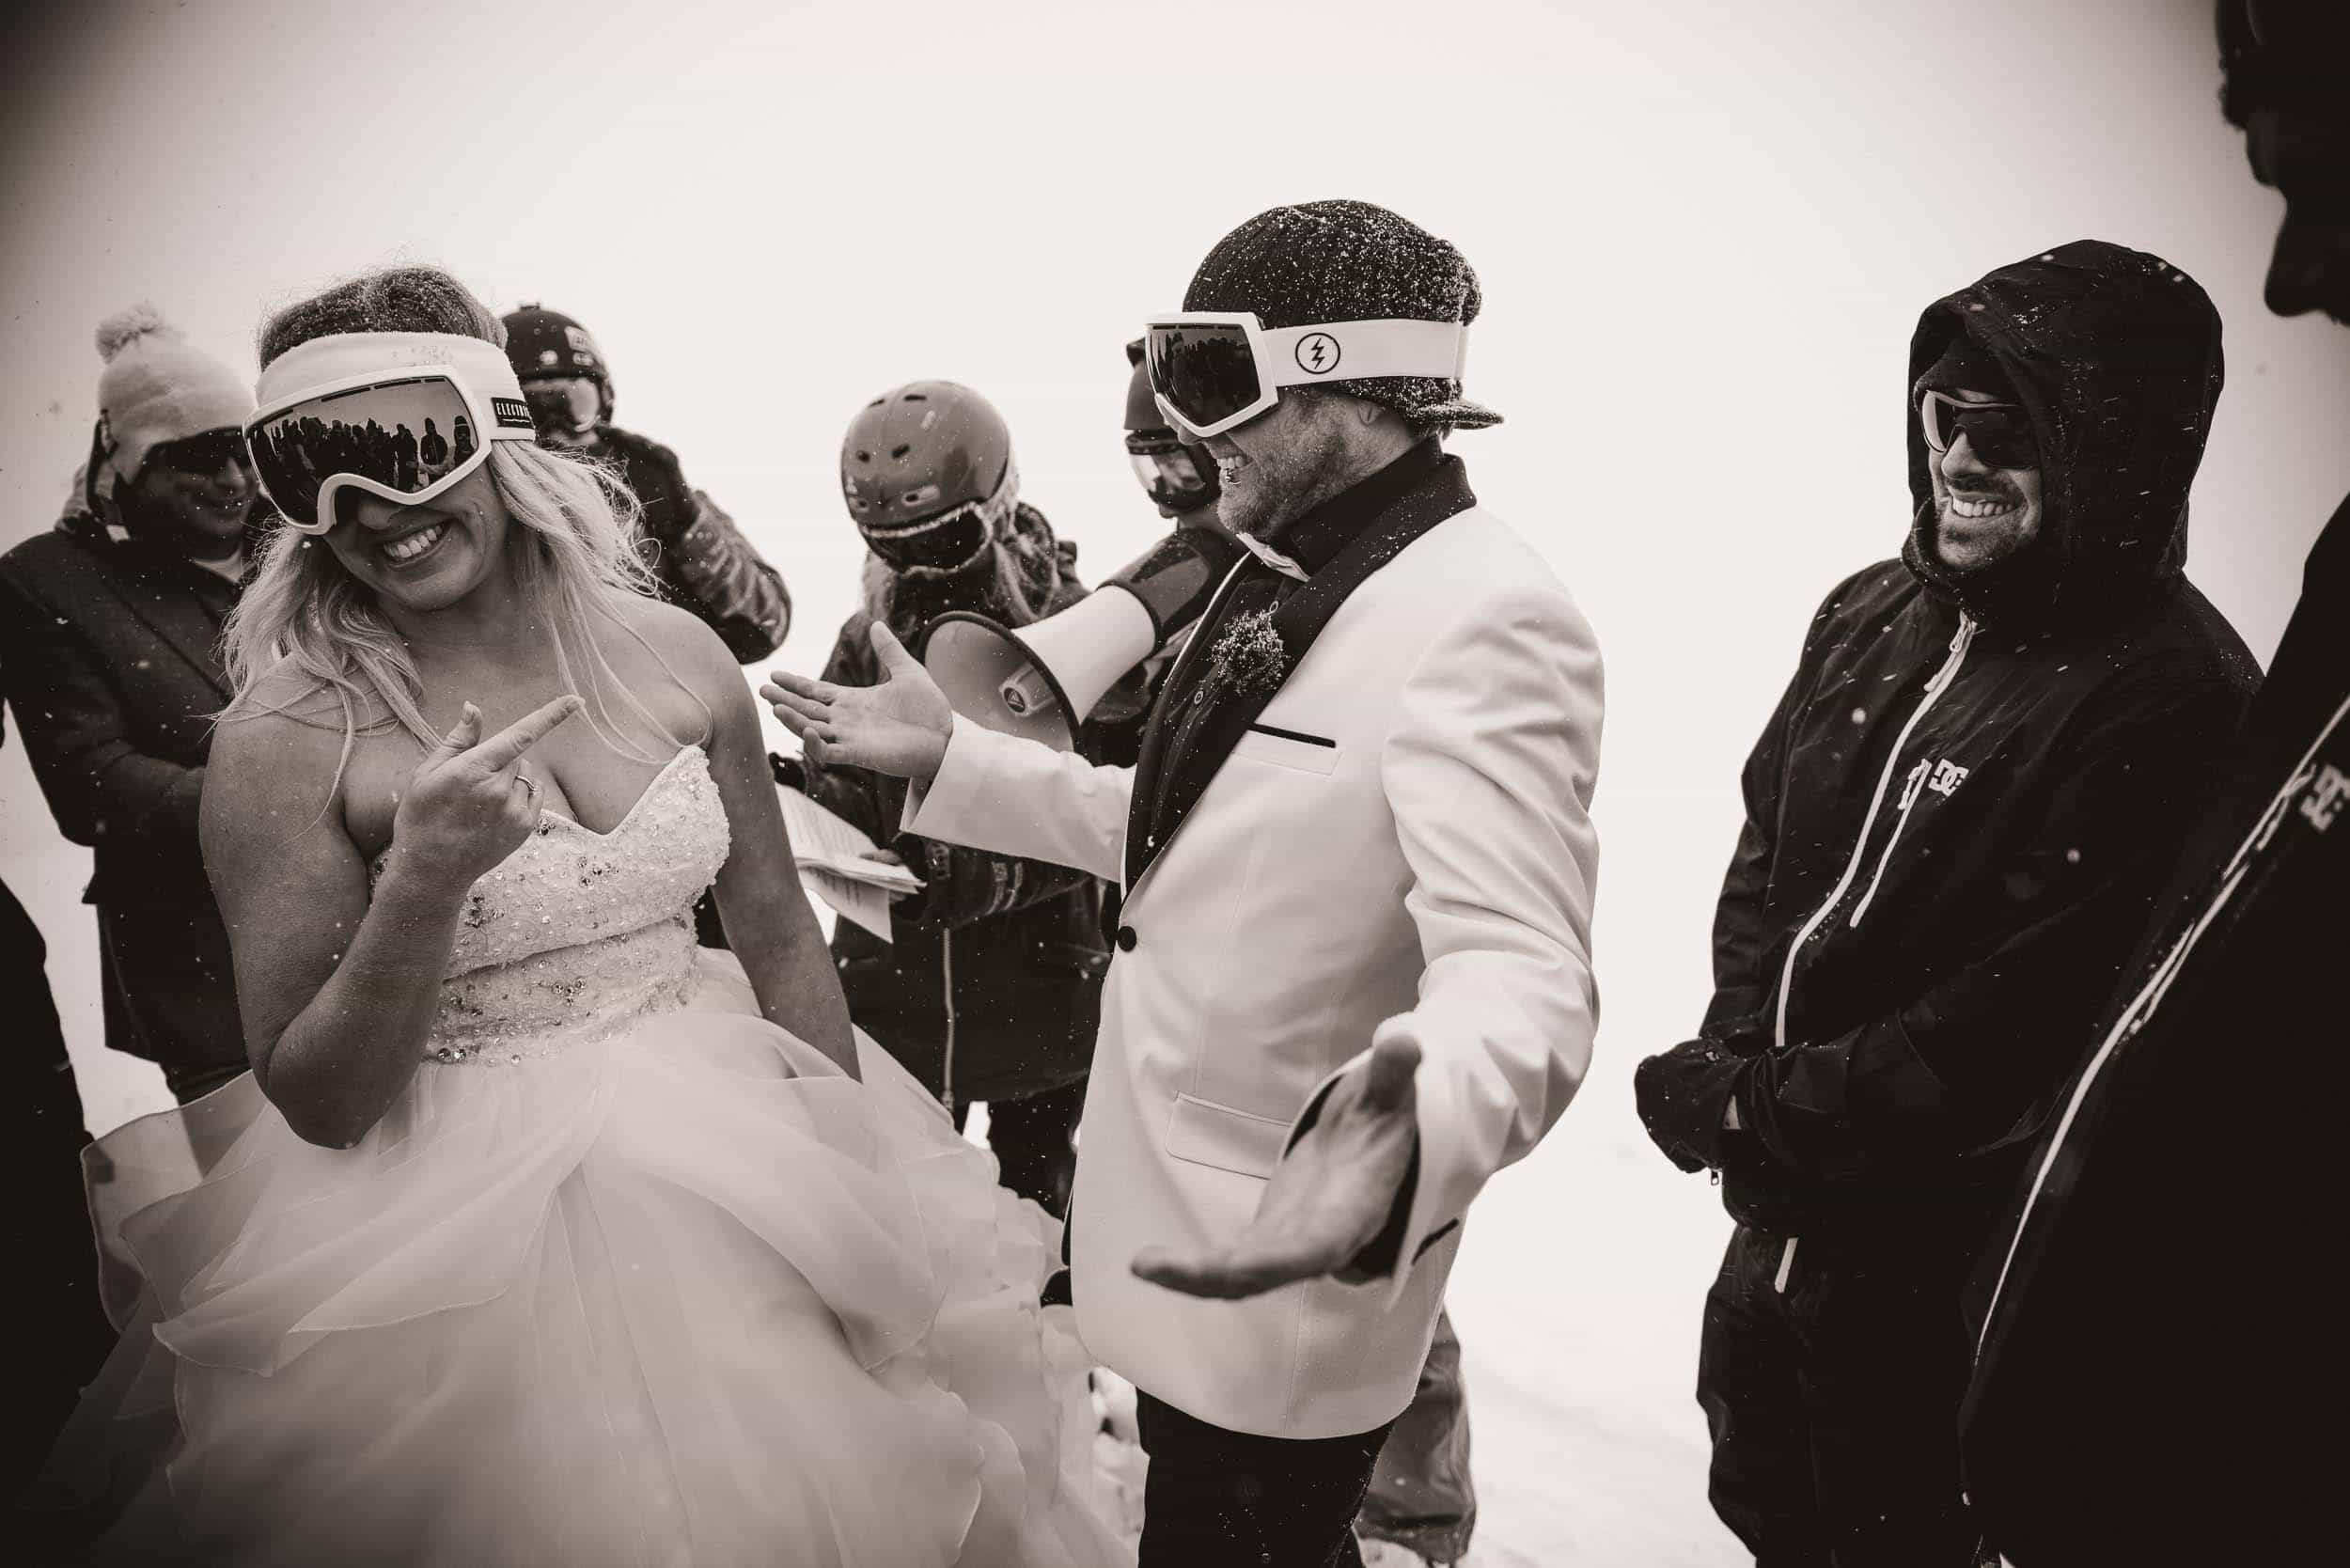 Now this is what I call a Queenstown Winter Wedding!!  At Coronet Peak...on snowboards...in a snow storm!! fallon photography